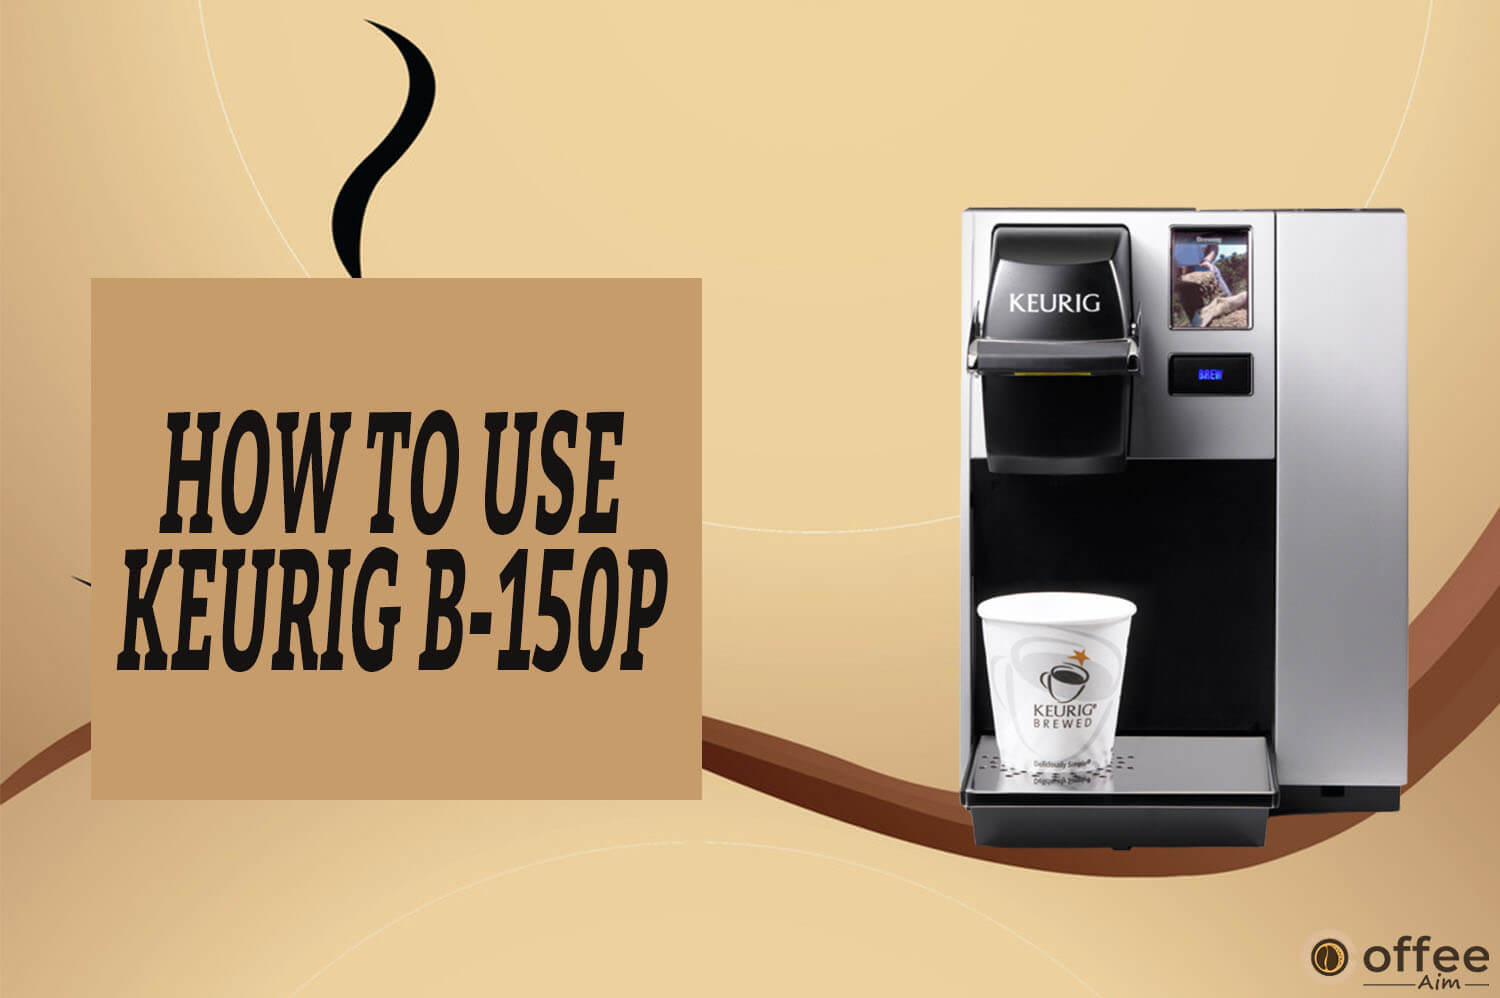 Feature image for the article "How to Use Keurig B-150p'